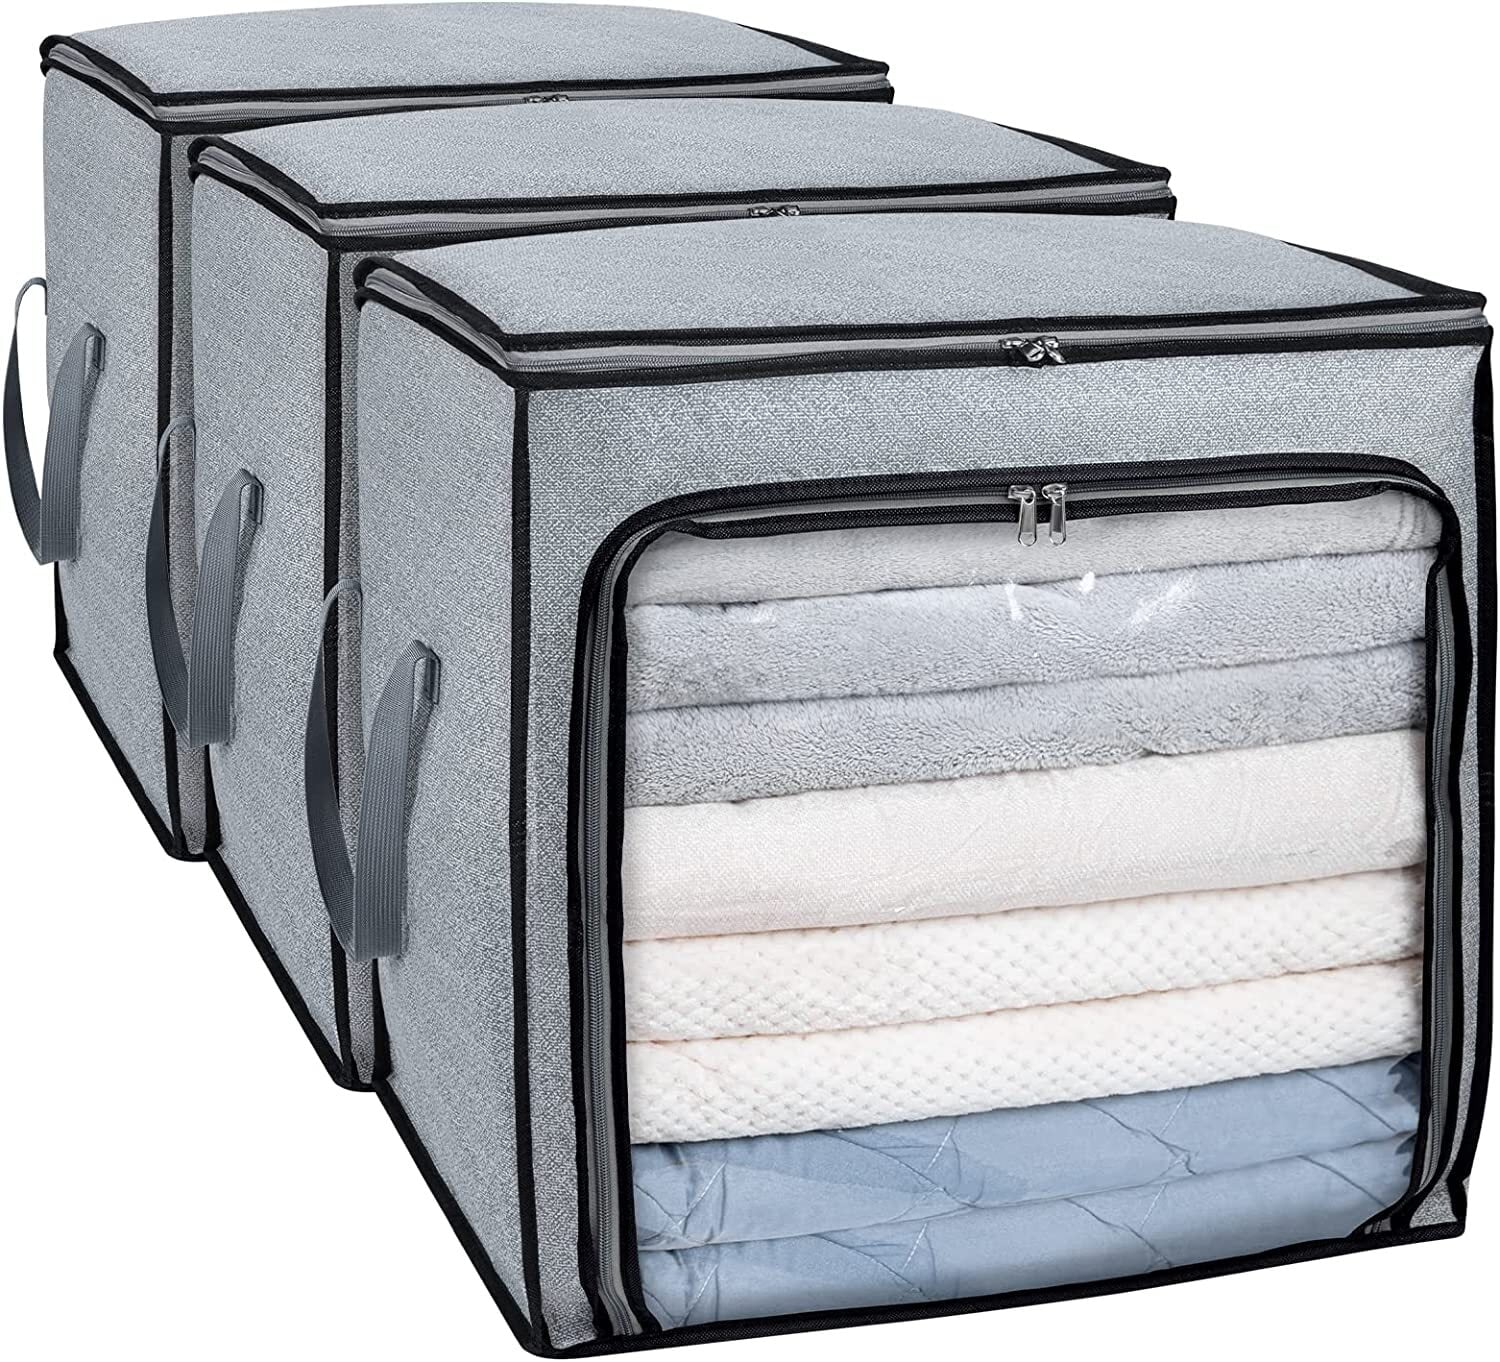  HomeHacks 3-Pack Clothes Storage,Foldable Blanket Storage Bags,Storage  Containers for Organizing, Clothing, Bedroom, Comforter, Closet, Dorm,  Sweater, Quilts, Organizer, Grey : Home & Kitchen